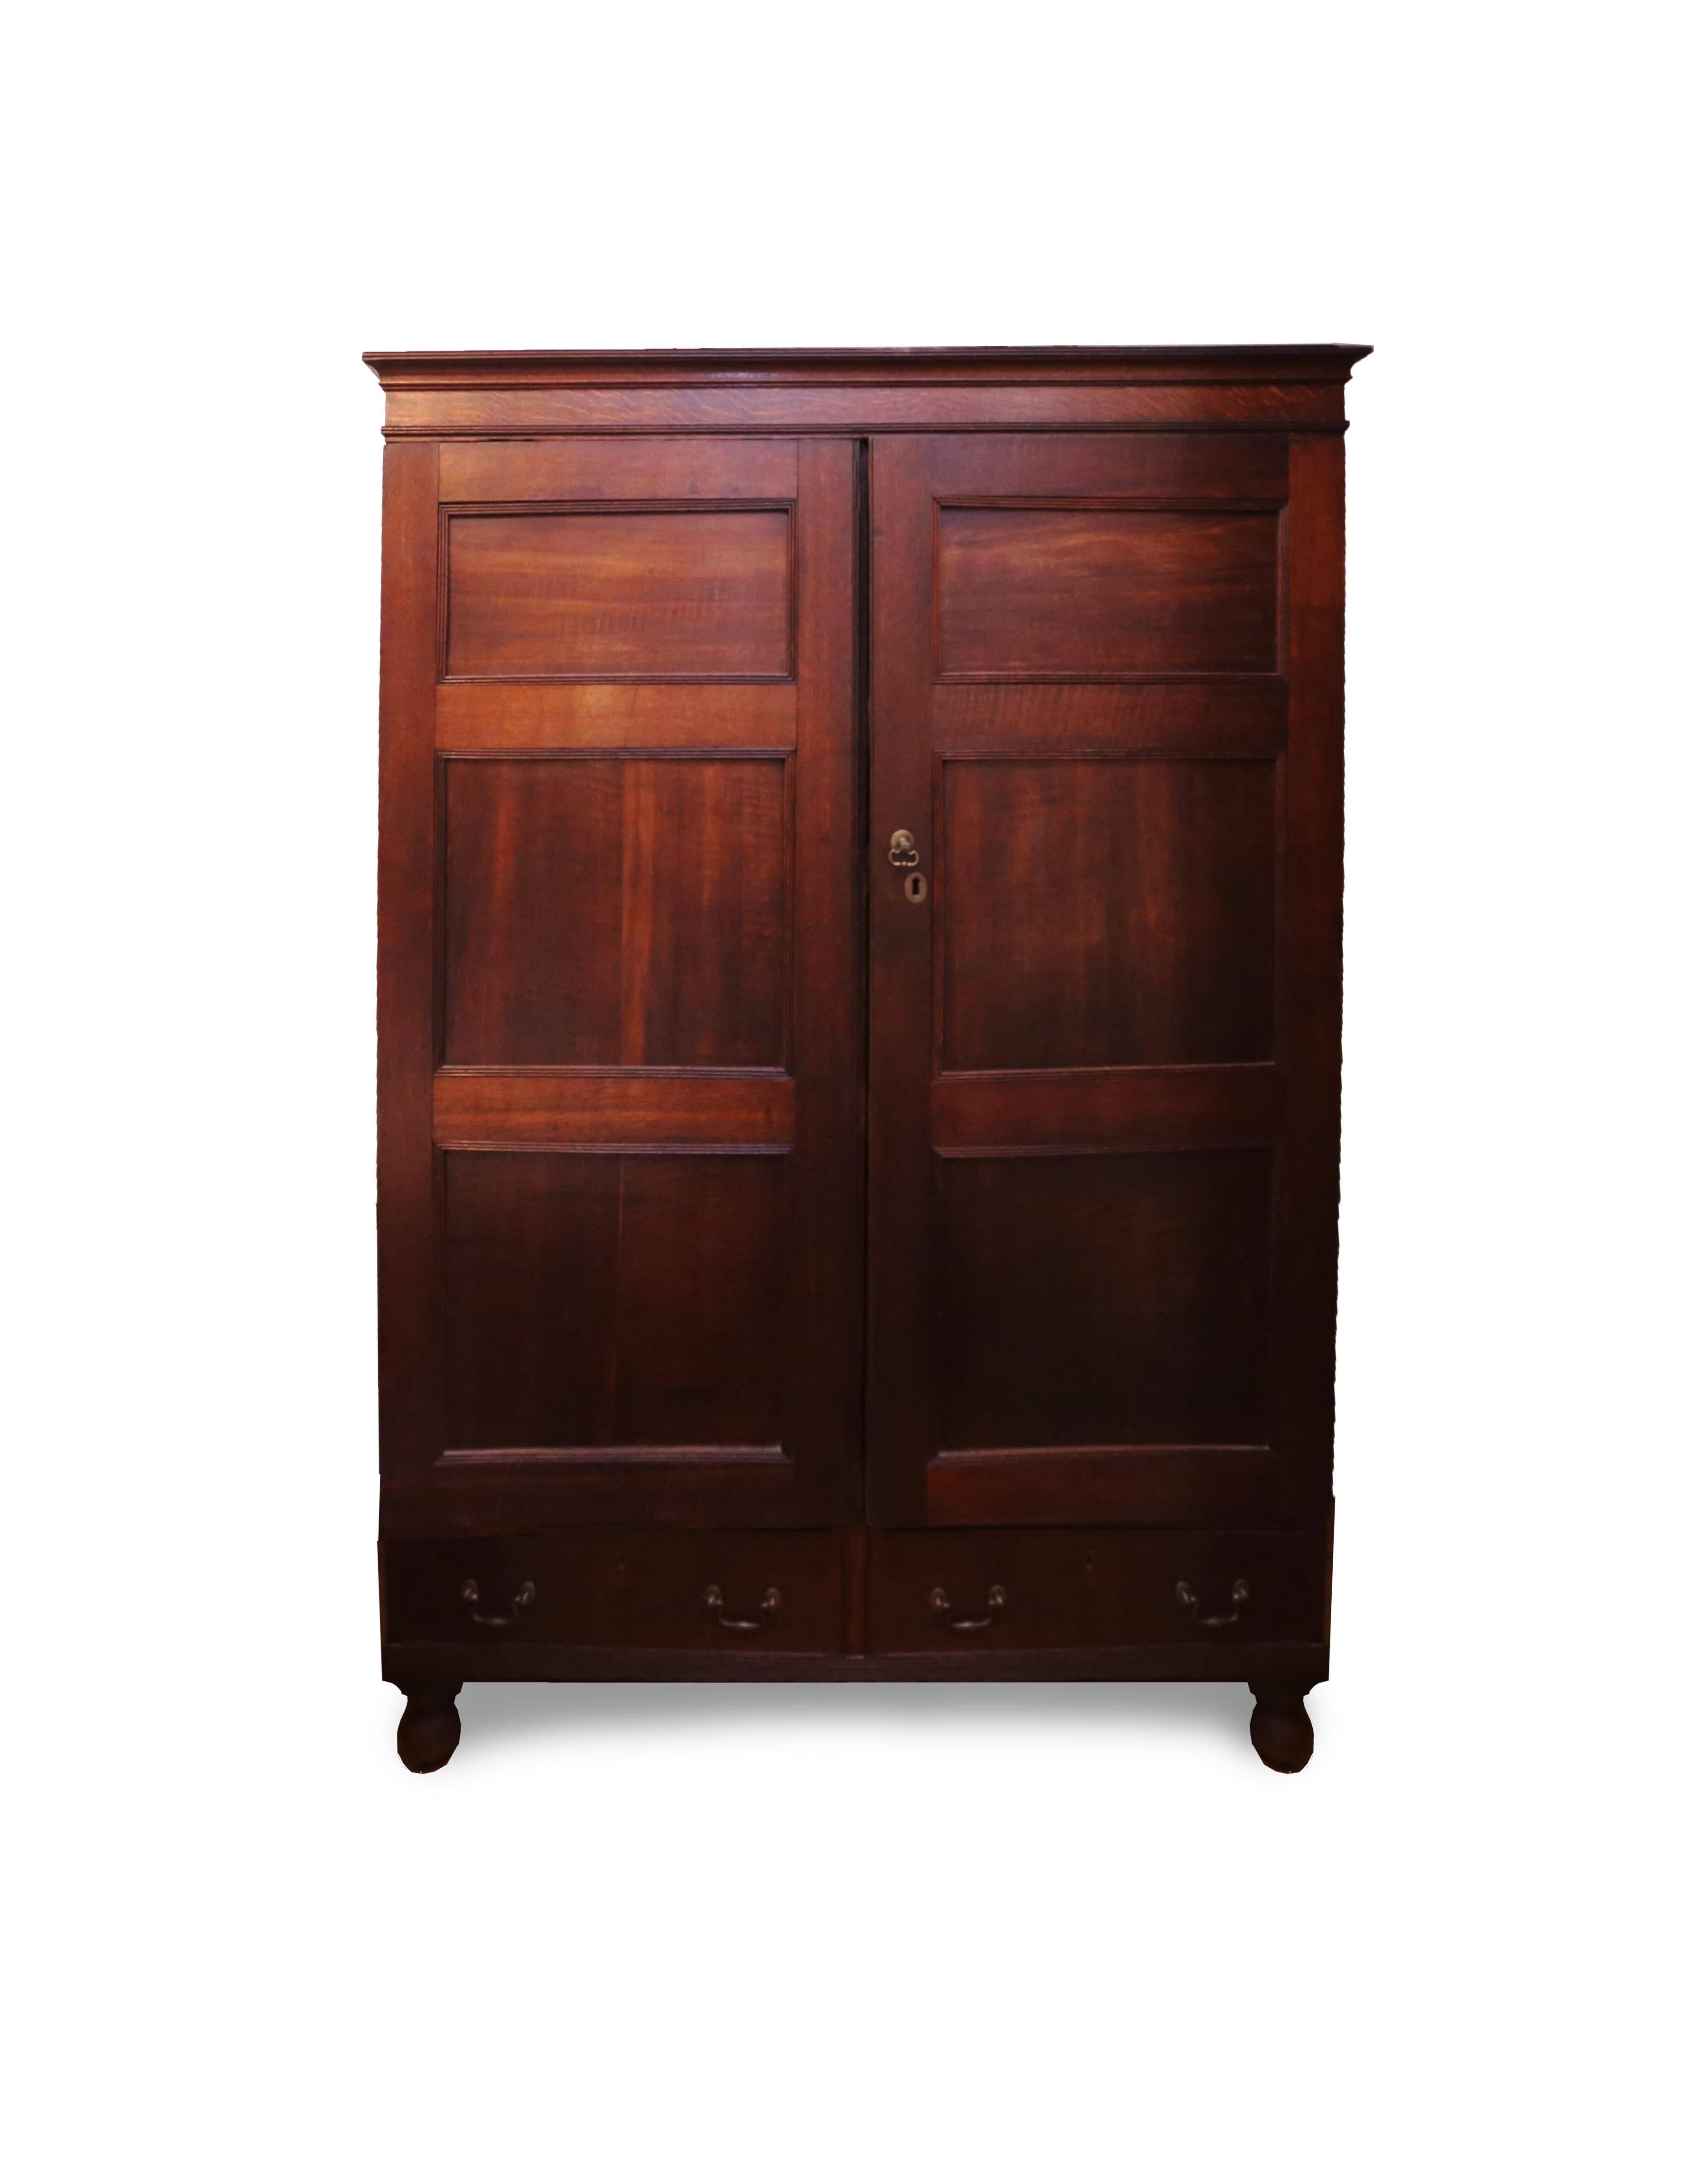 A stunning armoire with clean simple lines and masculine, handsome proportions. The coloring is particularly fine with a deep amber hue. The case sits on bun feet with concealed castors. A simple cornice crowns the top with Fine incised beaded edges